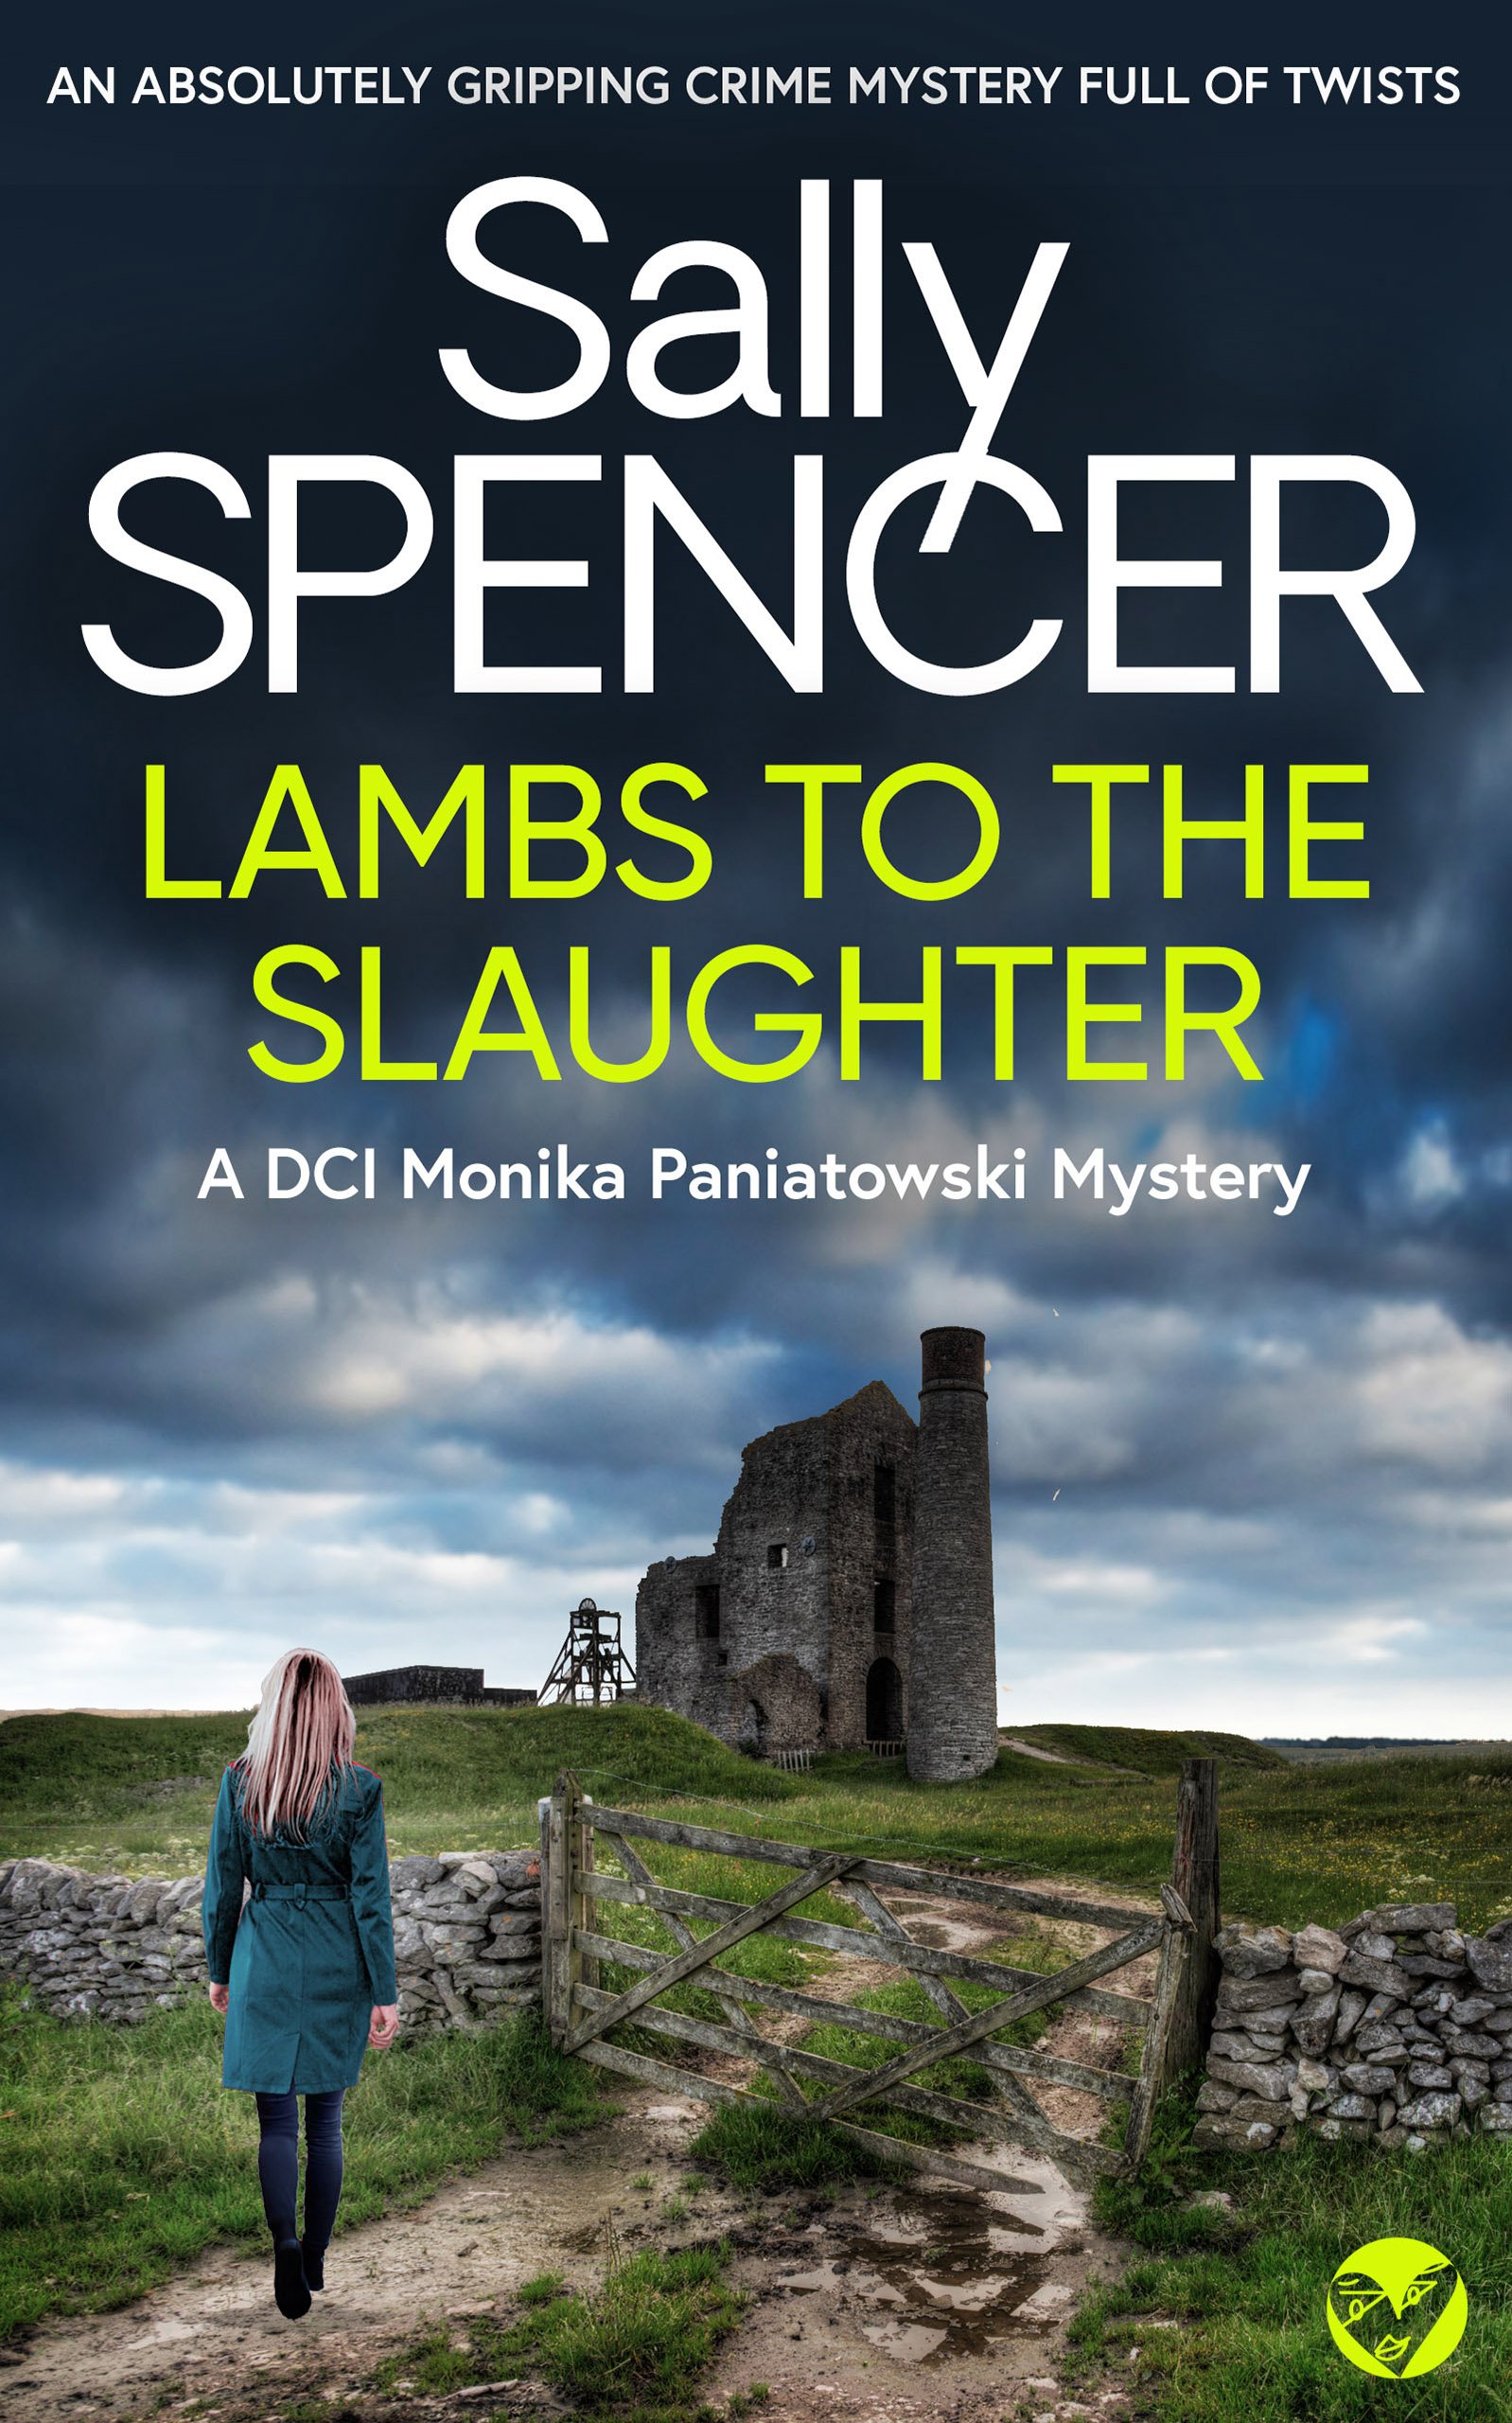 LAMBS TO THE SLAUGHTER cover publish.jpg